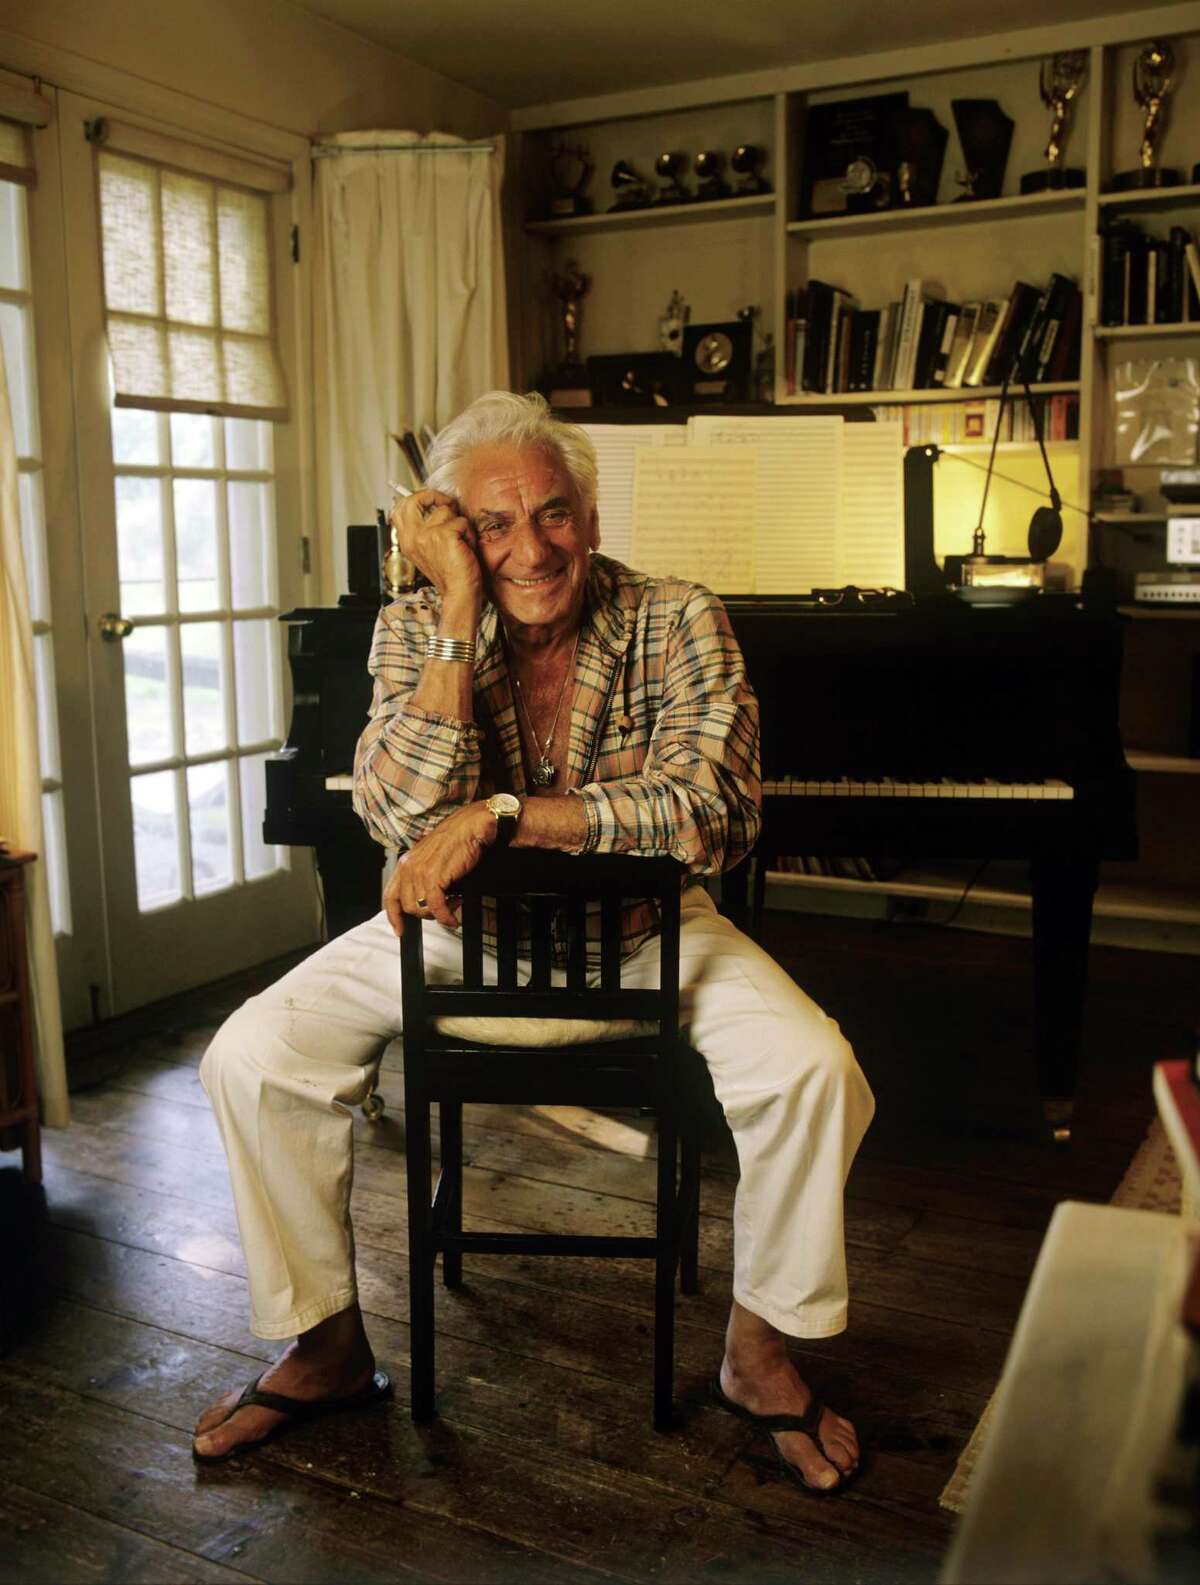 FAIRFIELD, CT - 1986: Composer Leonard Bernstein poses near a piano in 1986 at Springate, his Fairfield, Connecticut home. Bernstein's most recognizable affiliation was as the longtime music director of the New York Philharmonic Orchestra. In addition, Bernstein was noted for writing the music for the highly acclaimed musical, West Side Story. (Photo by Joe McNally/Getty Images)